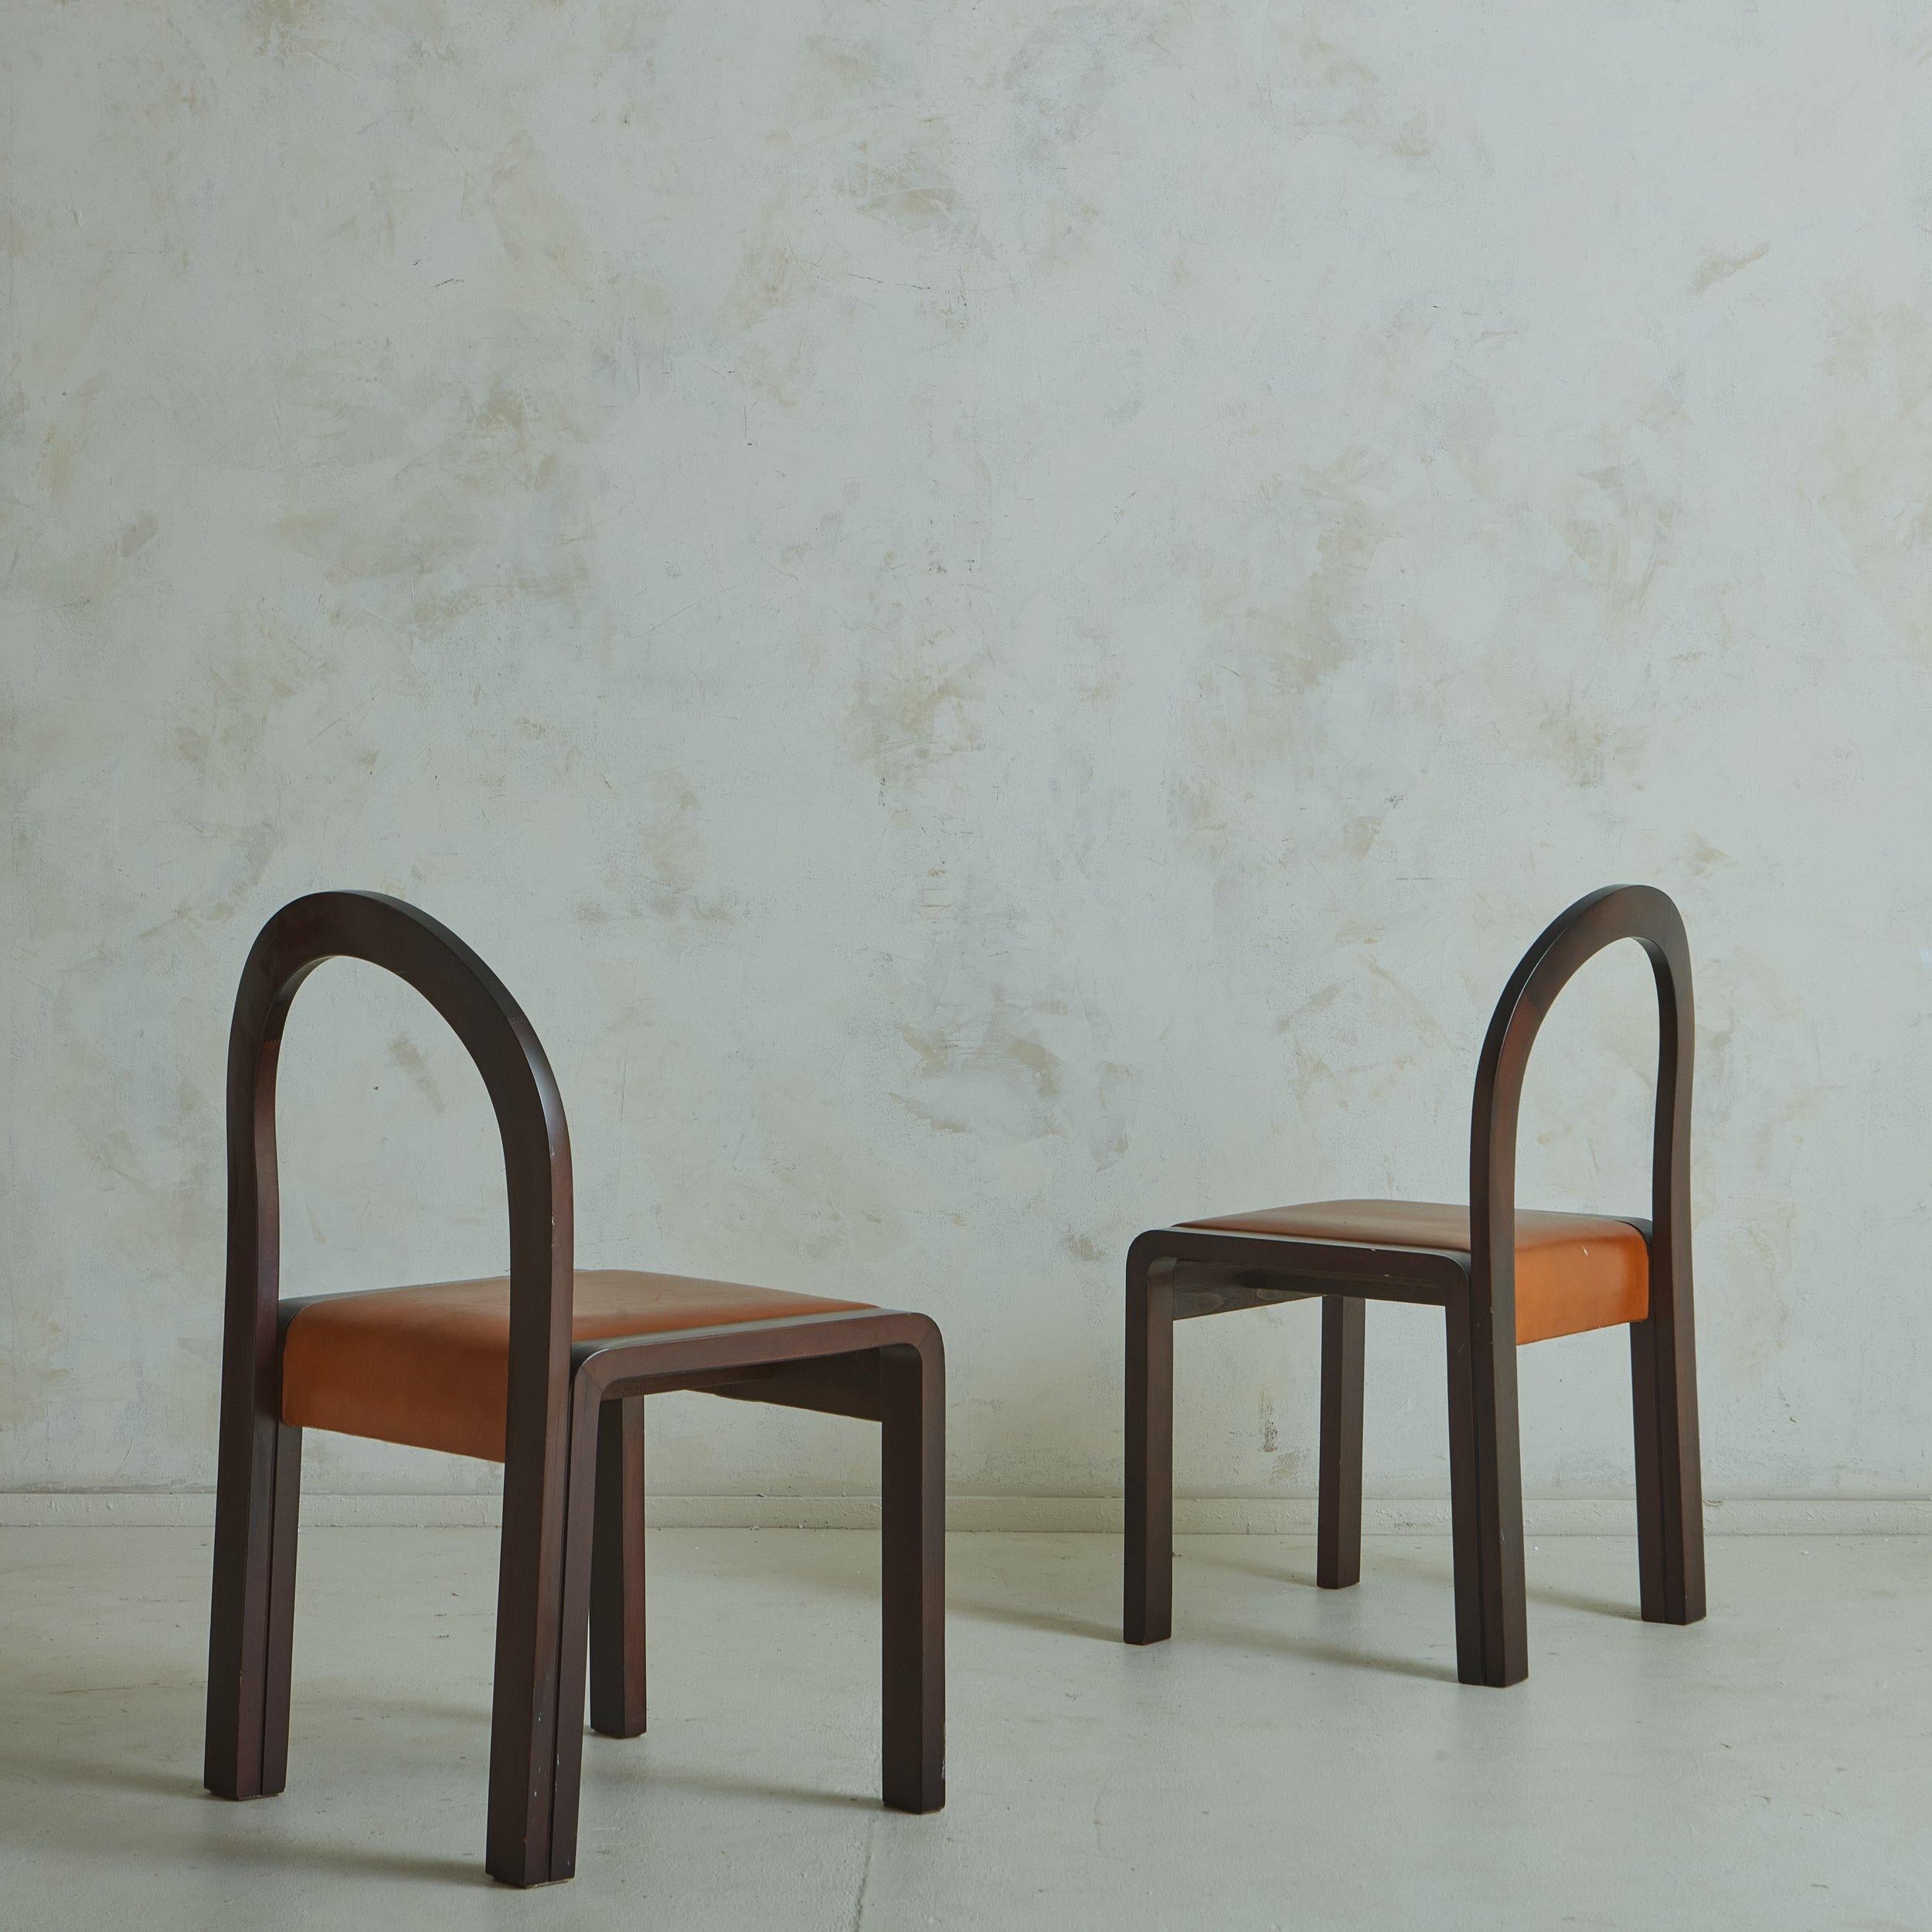 Italian Set of 4 Bentwood Dining Chairs with Cognac Leather Seats, Italy 1980s For Sale